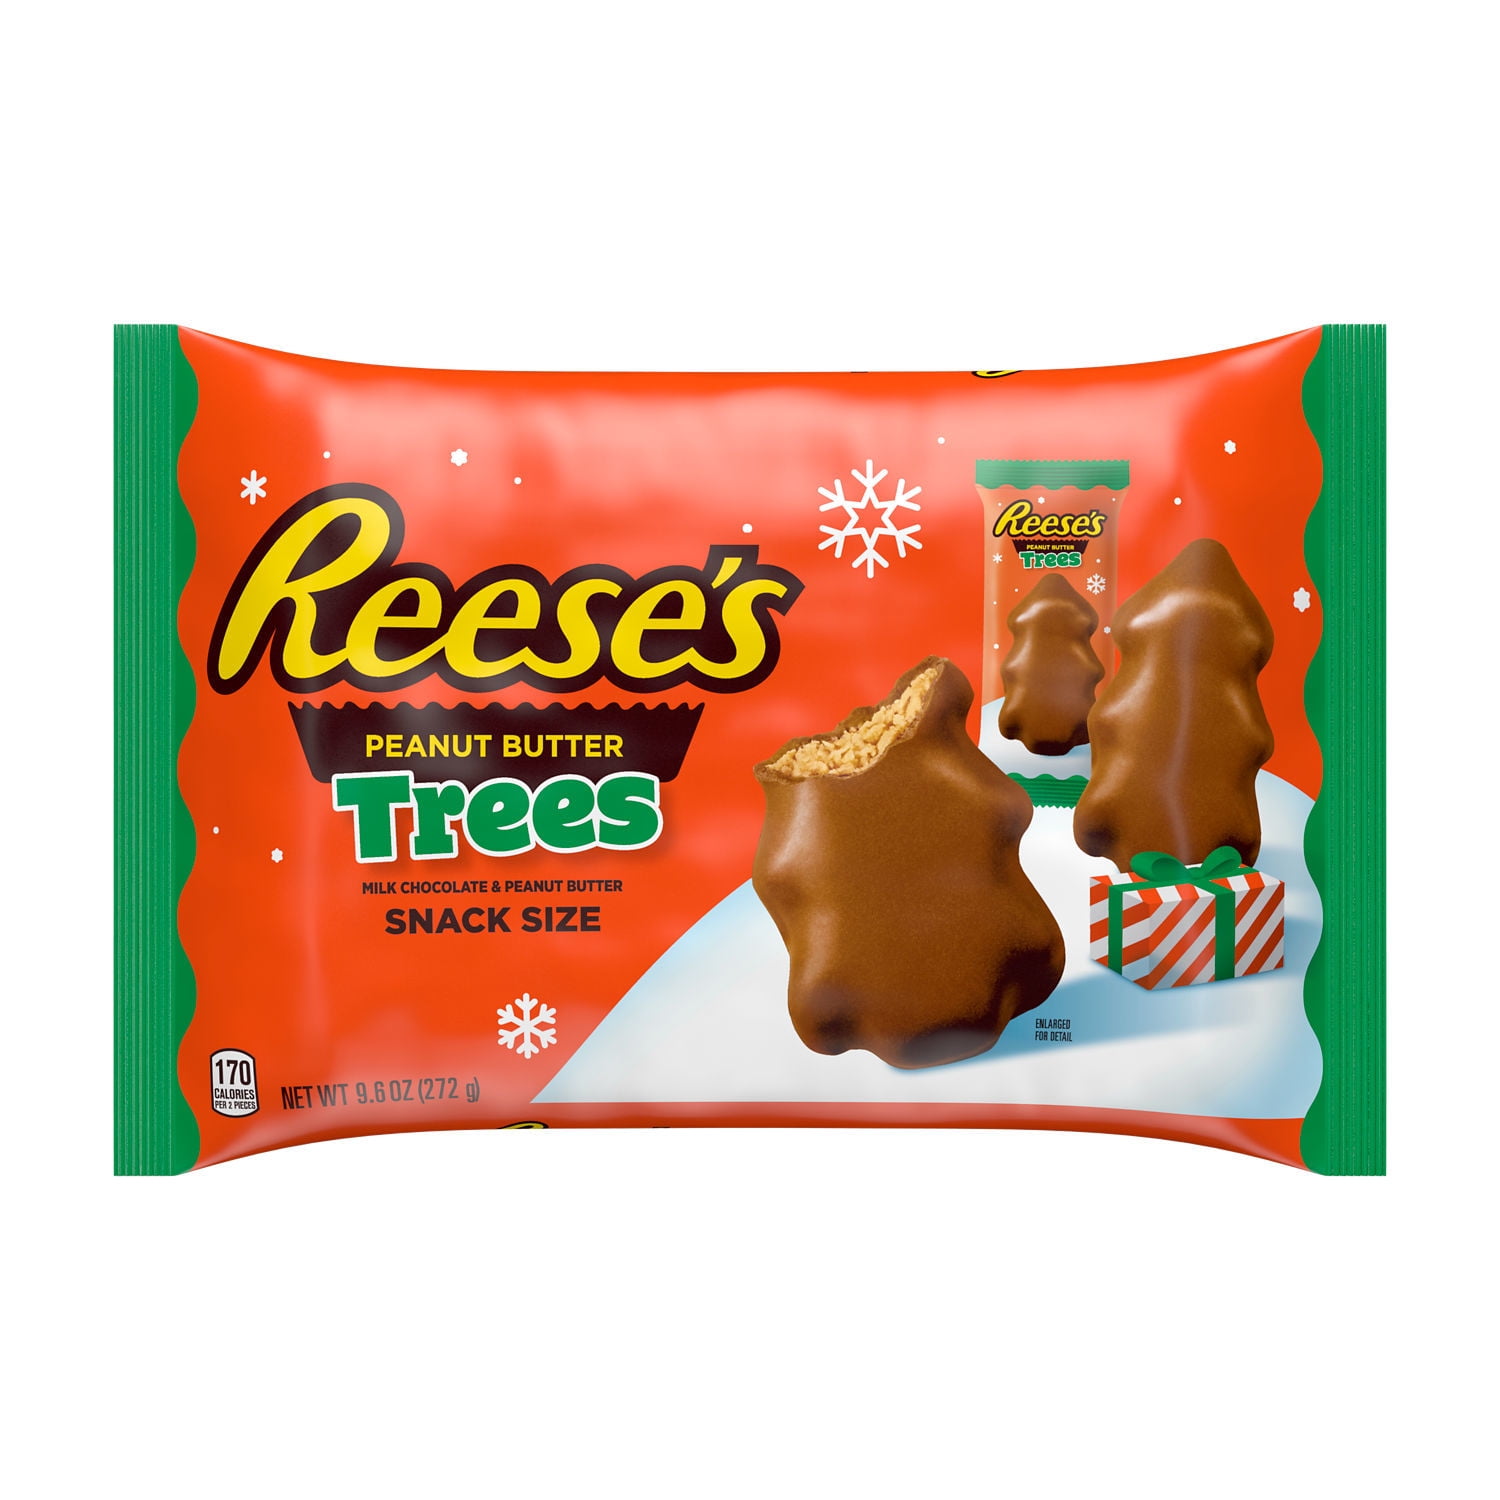 REESE'S, Milk Chocolate Peanut Butter Trees Snack Size Candy, Christmas, 9.6 oz, Bag